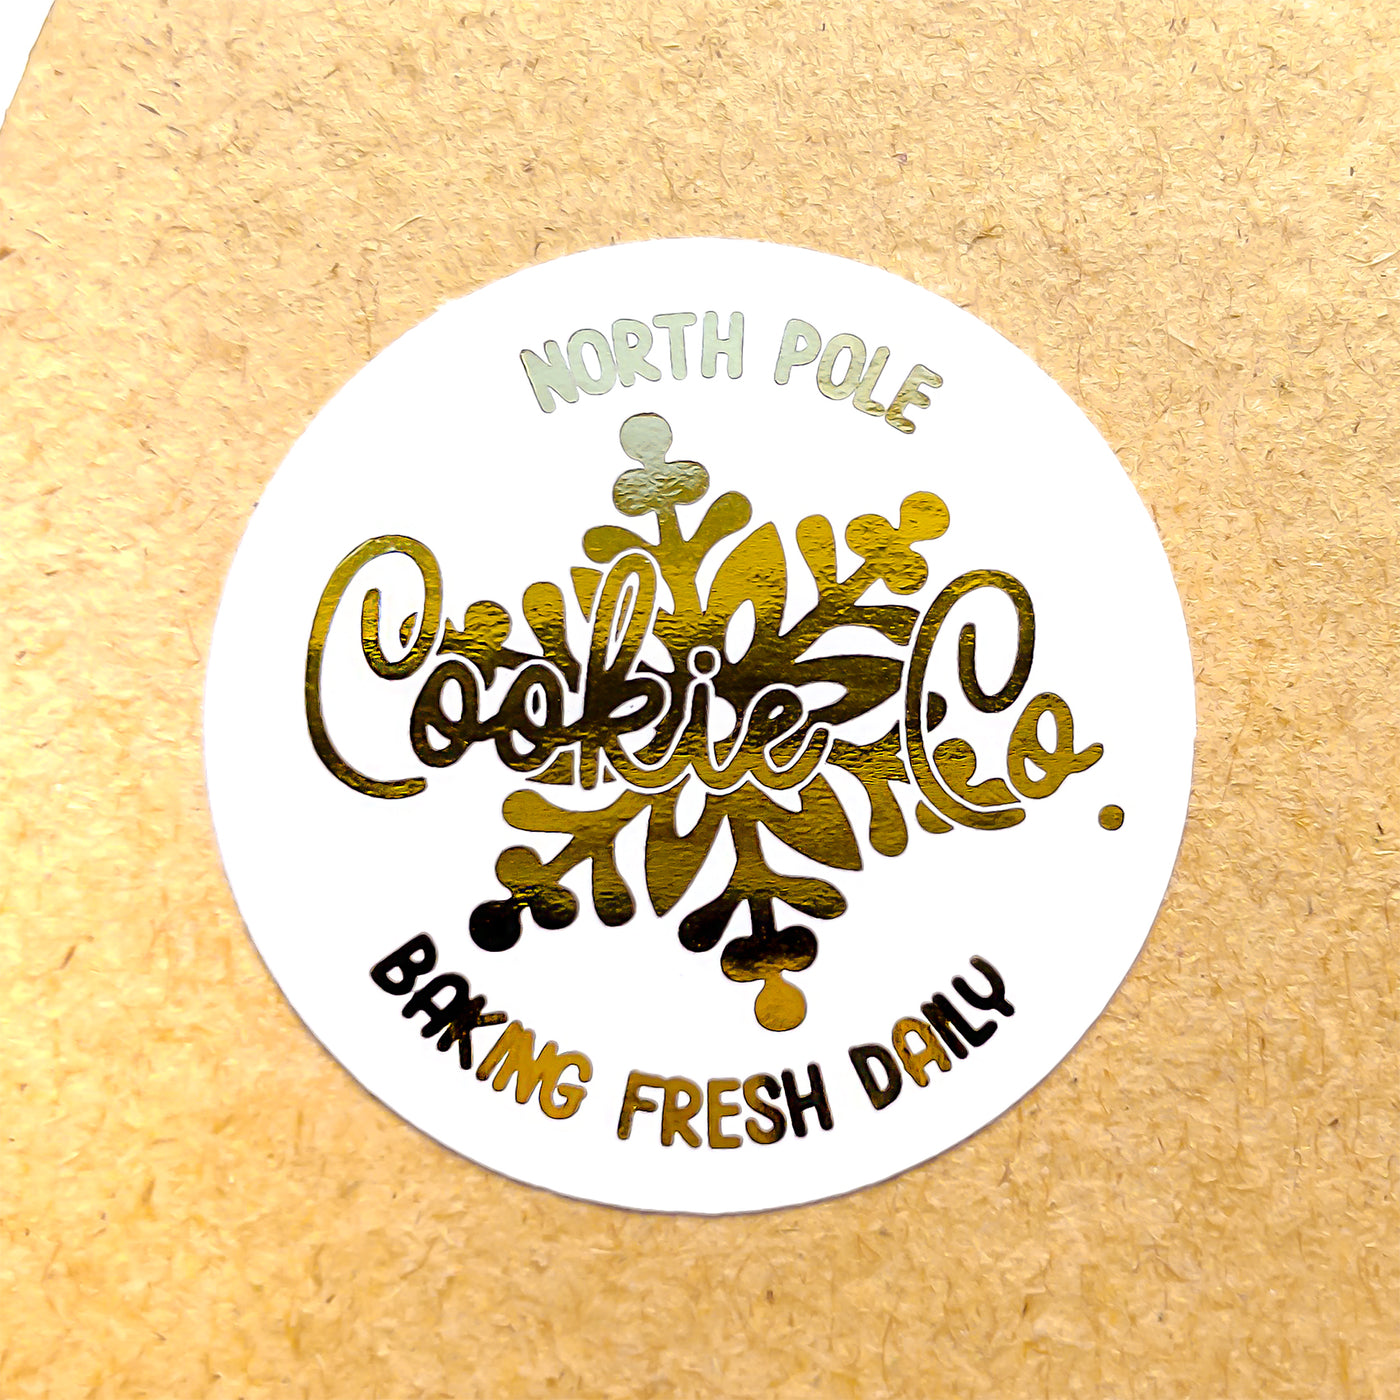 Foiled NORTH POLE COOKIE CO Stickers Round